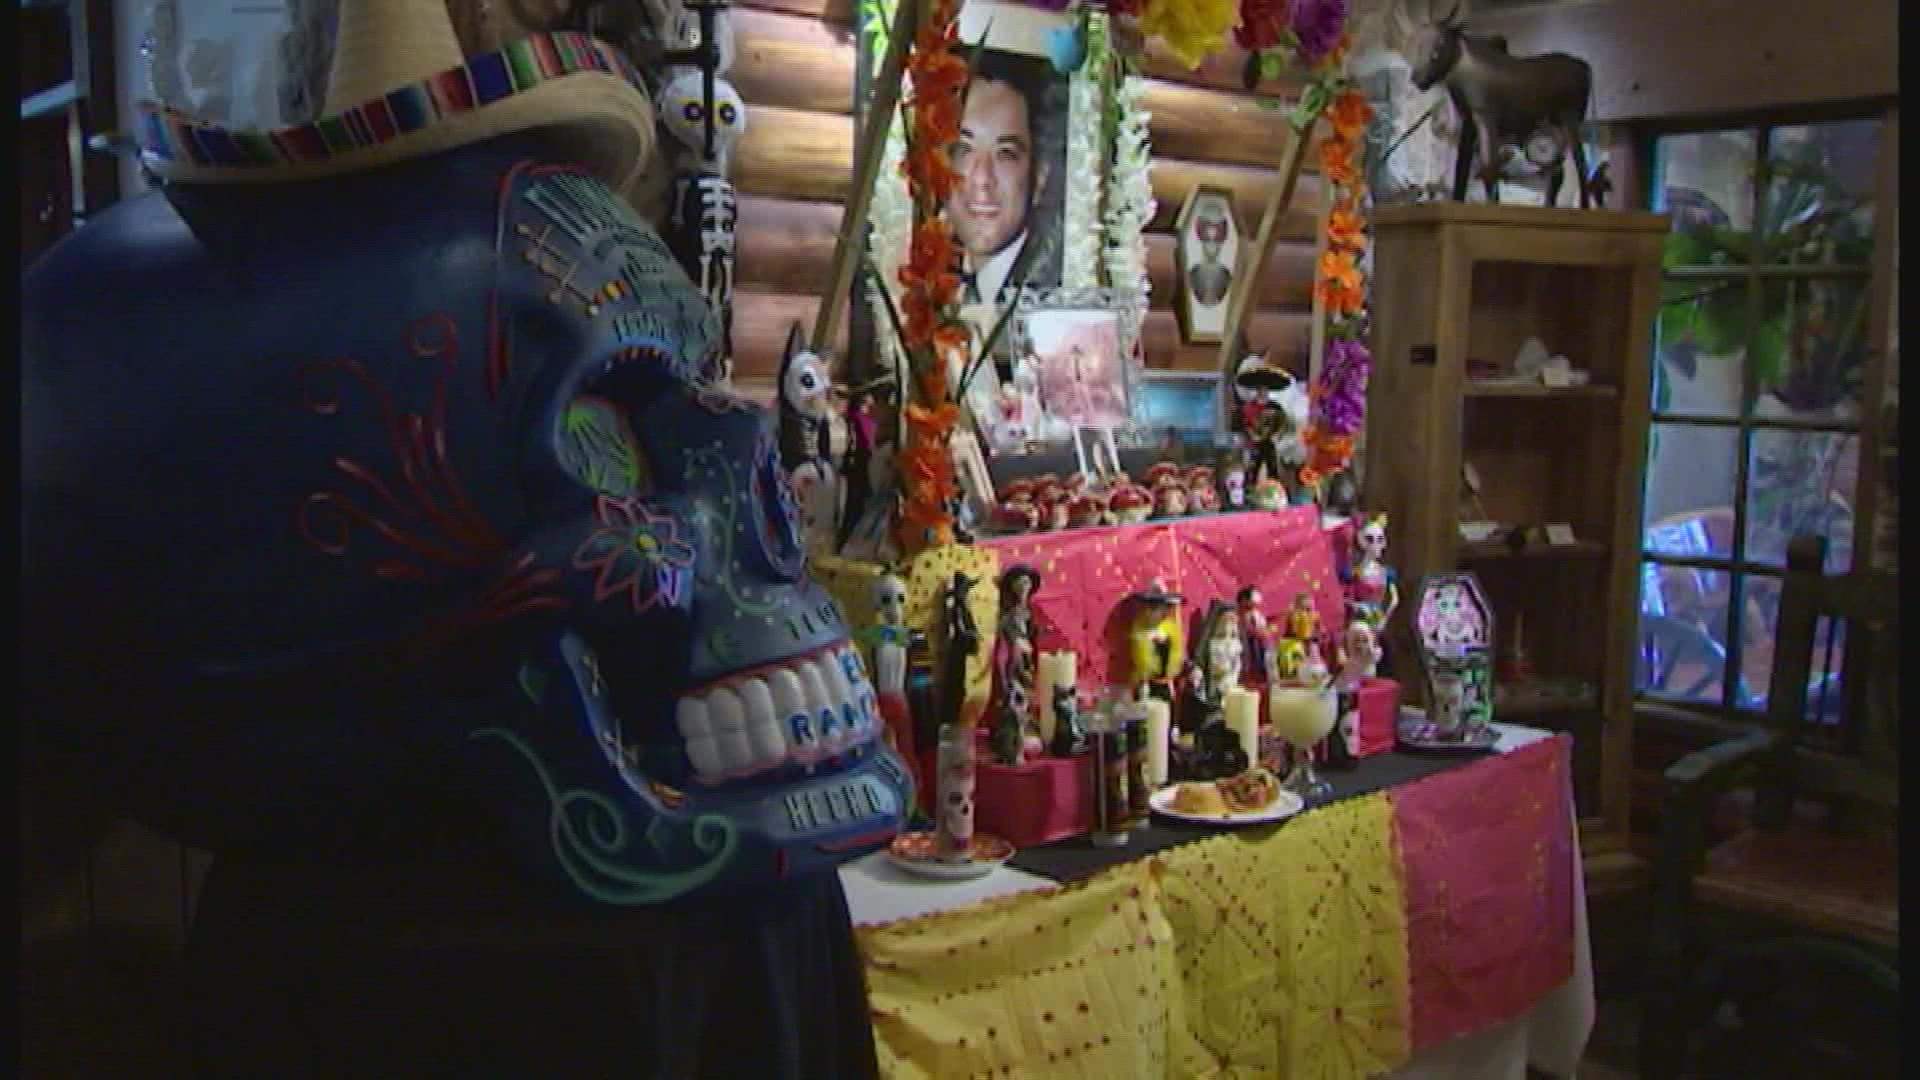 El Ranchito and La Calle Doce restaurants built altars in honor of Oscar Sanchez, who was kidnapped and murdered.